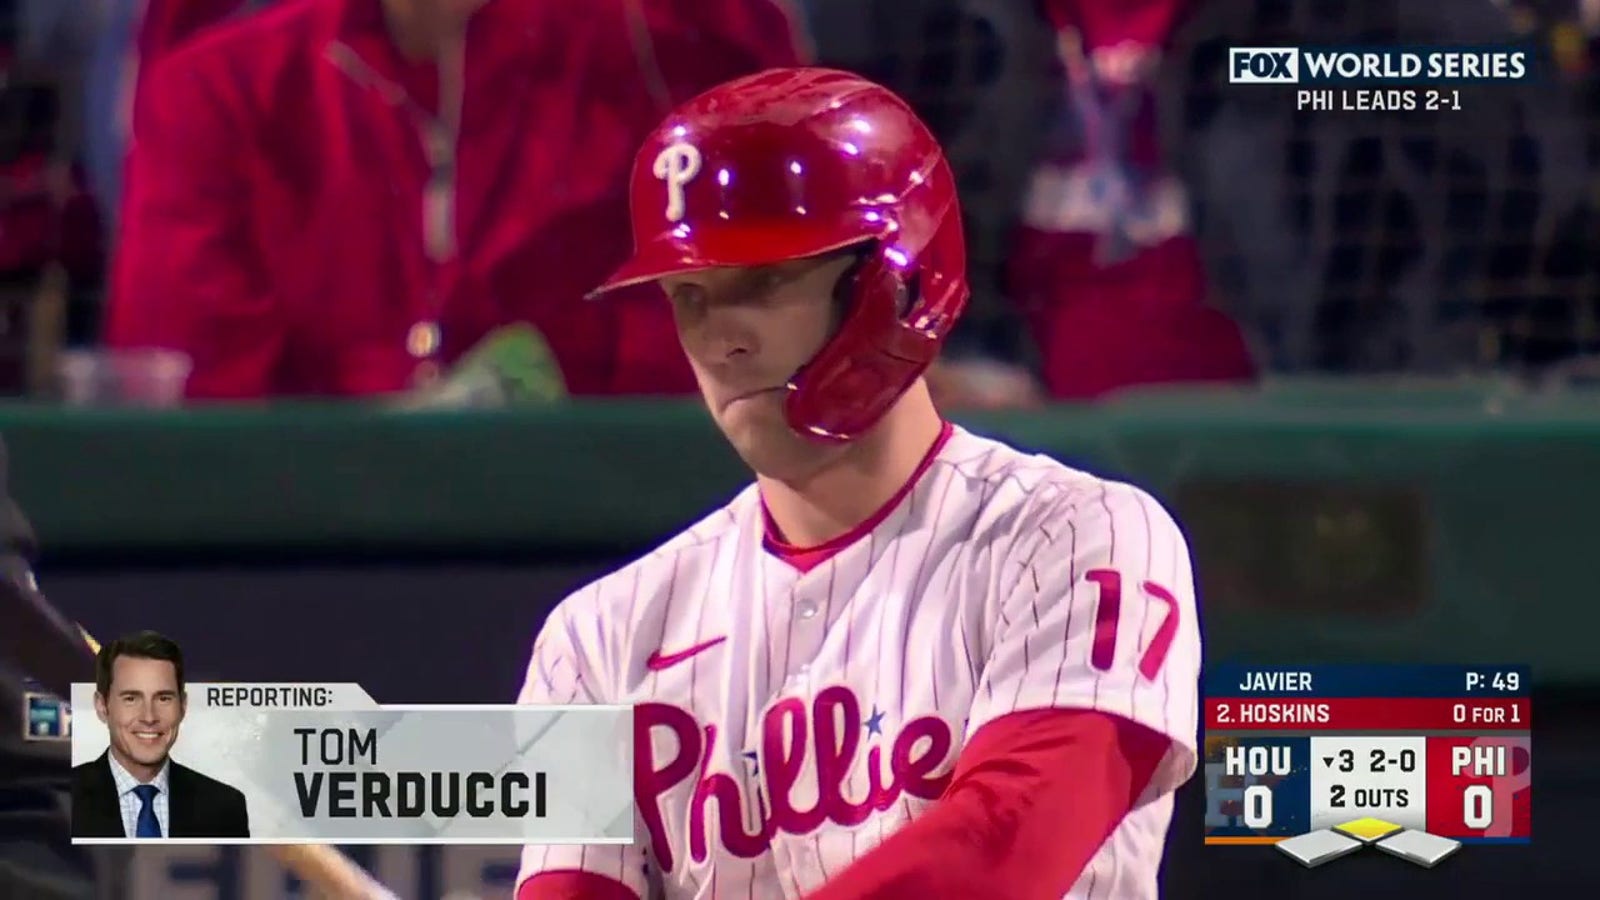 Tom Verducci talks Rhys Hoskins' wife, Jayme, buying beer for Phillies fans